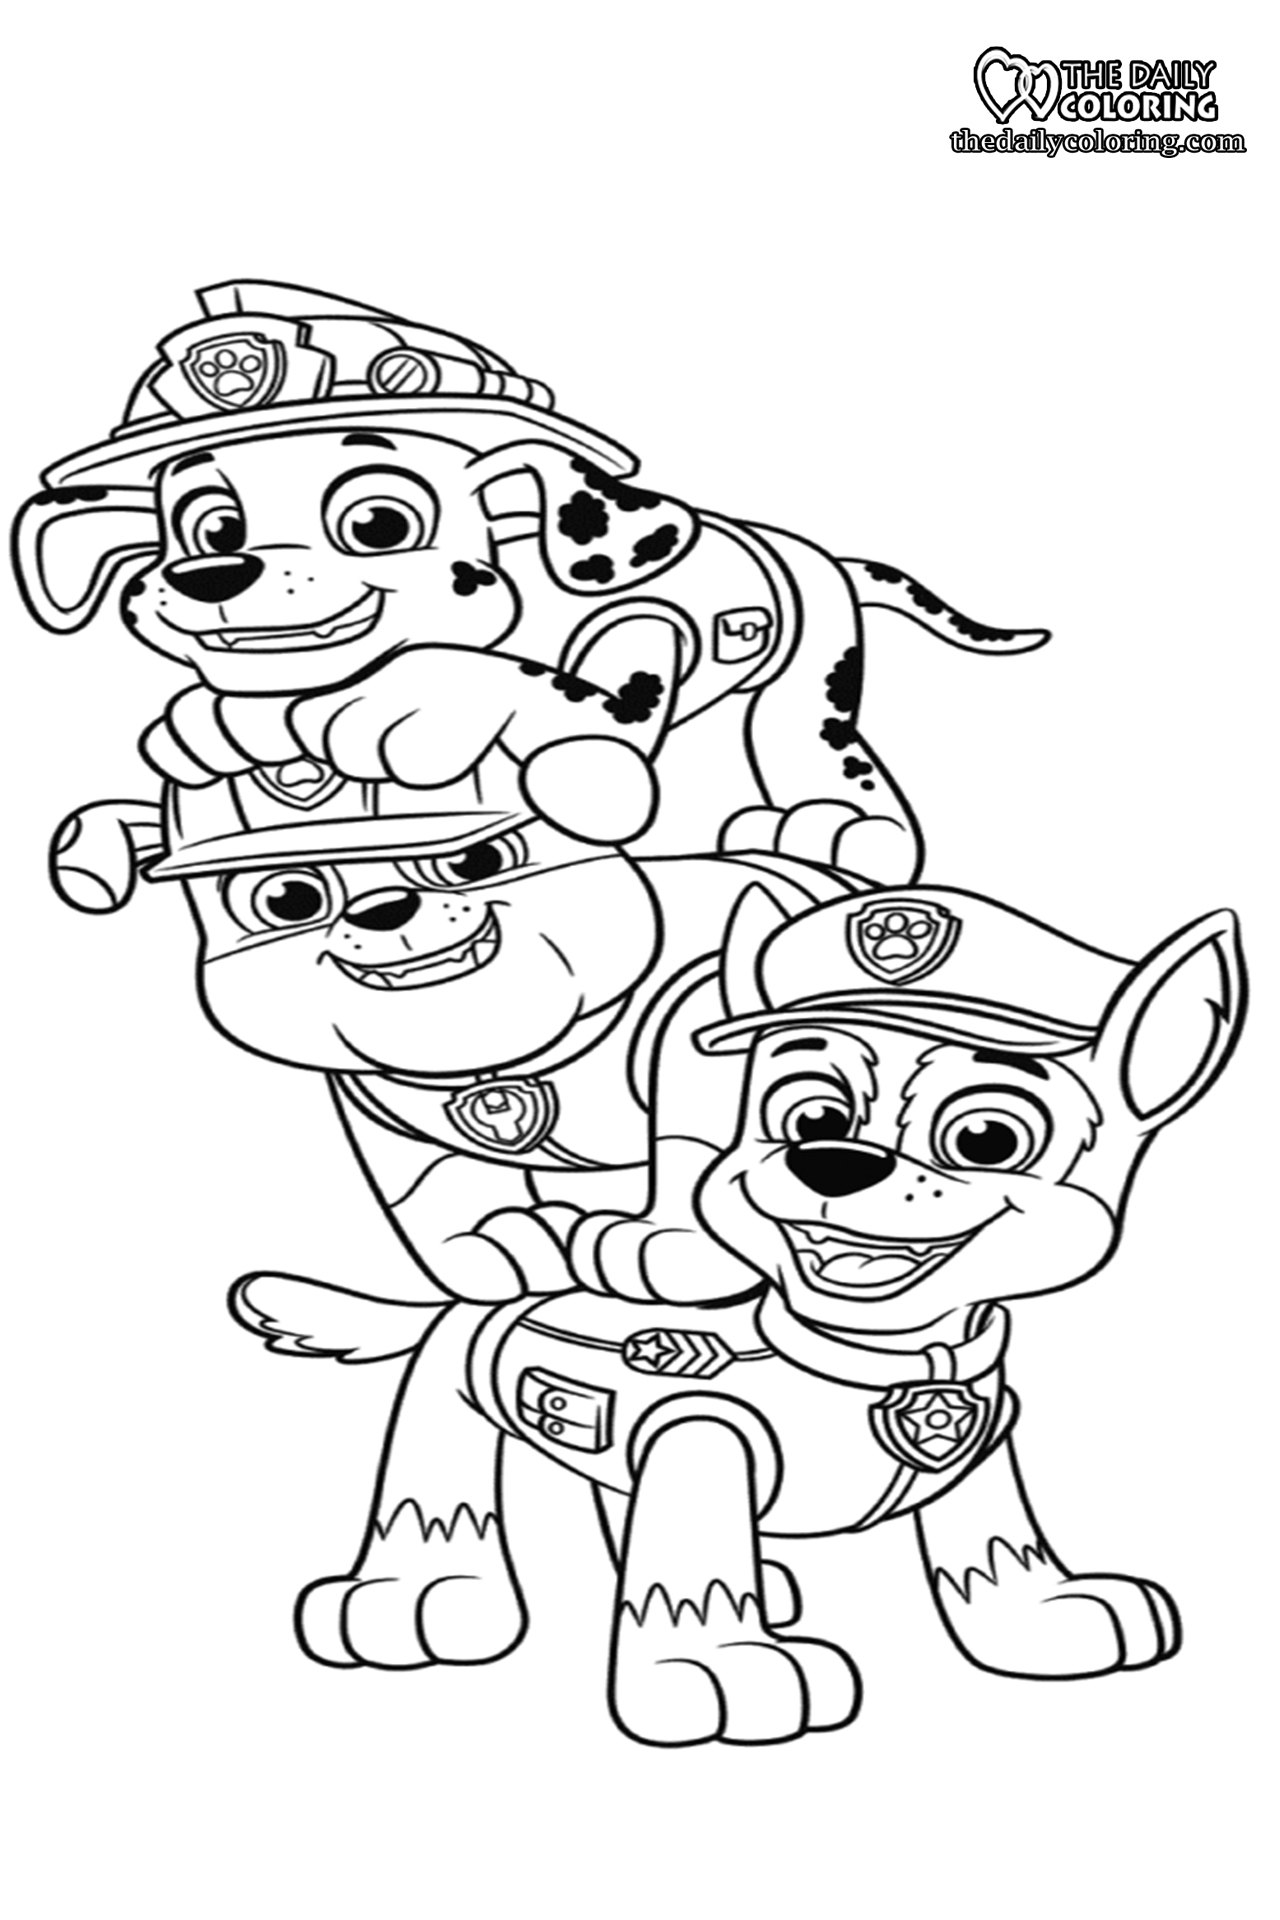 Free Printable Paw Patrol Coloring Pages [New] - The Daily Coloring